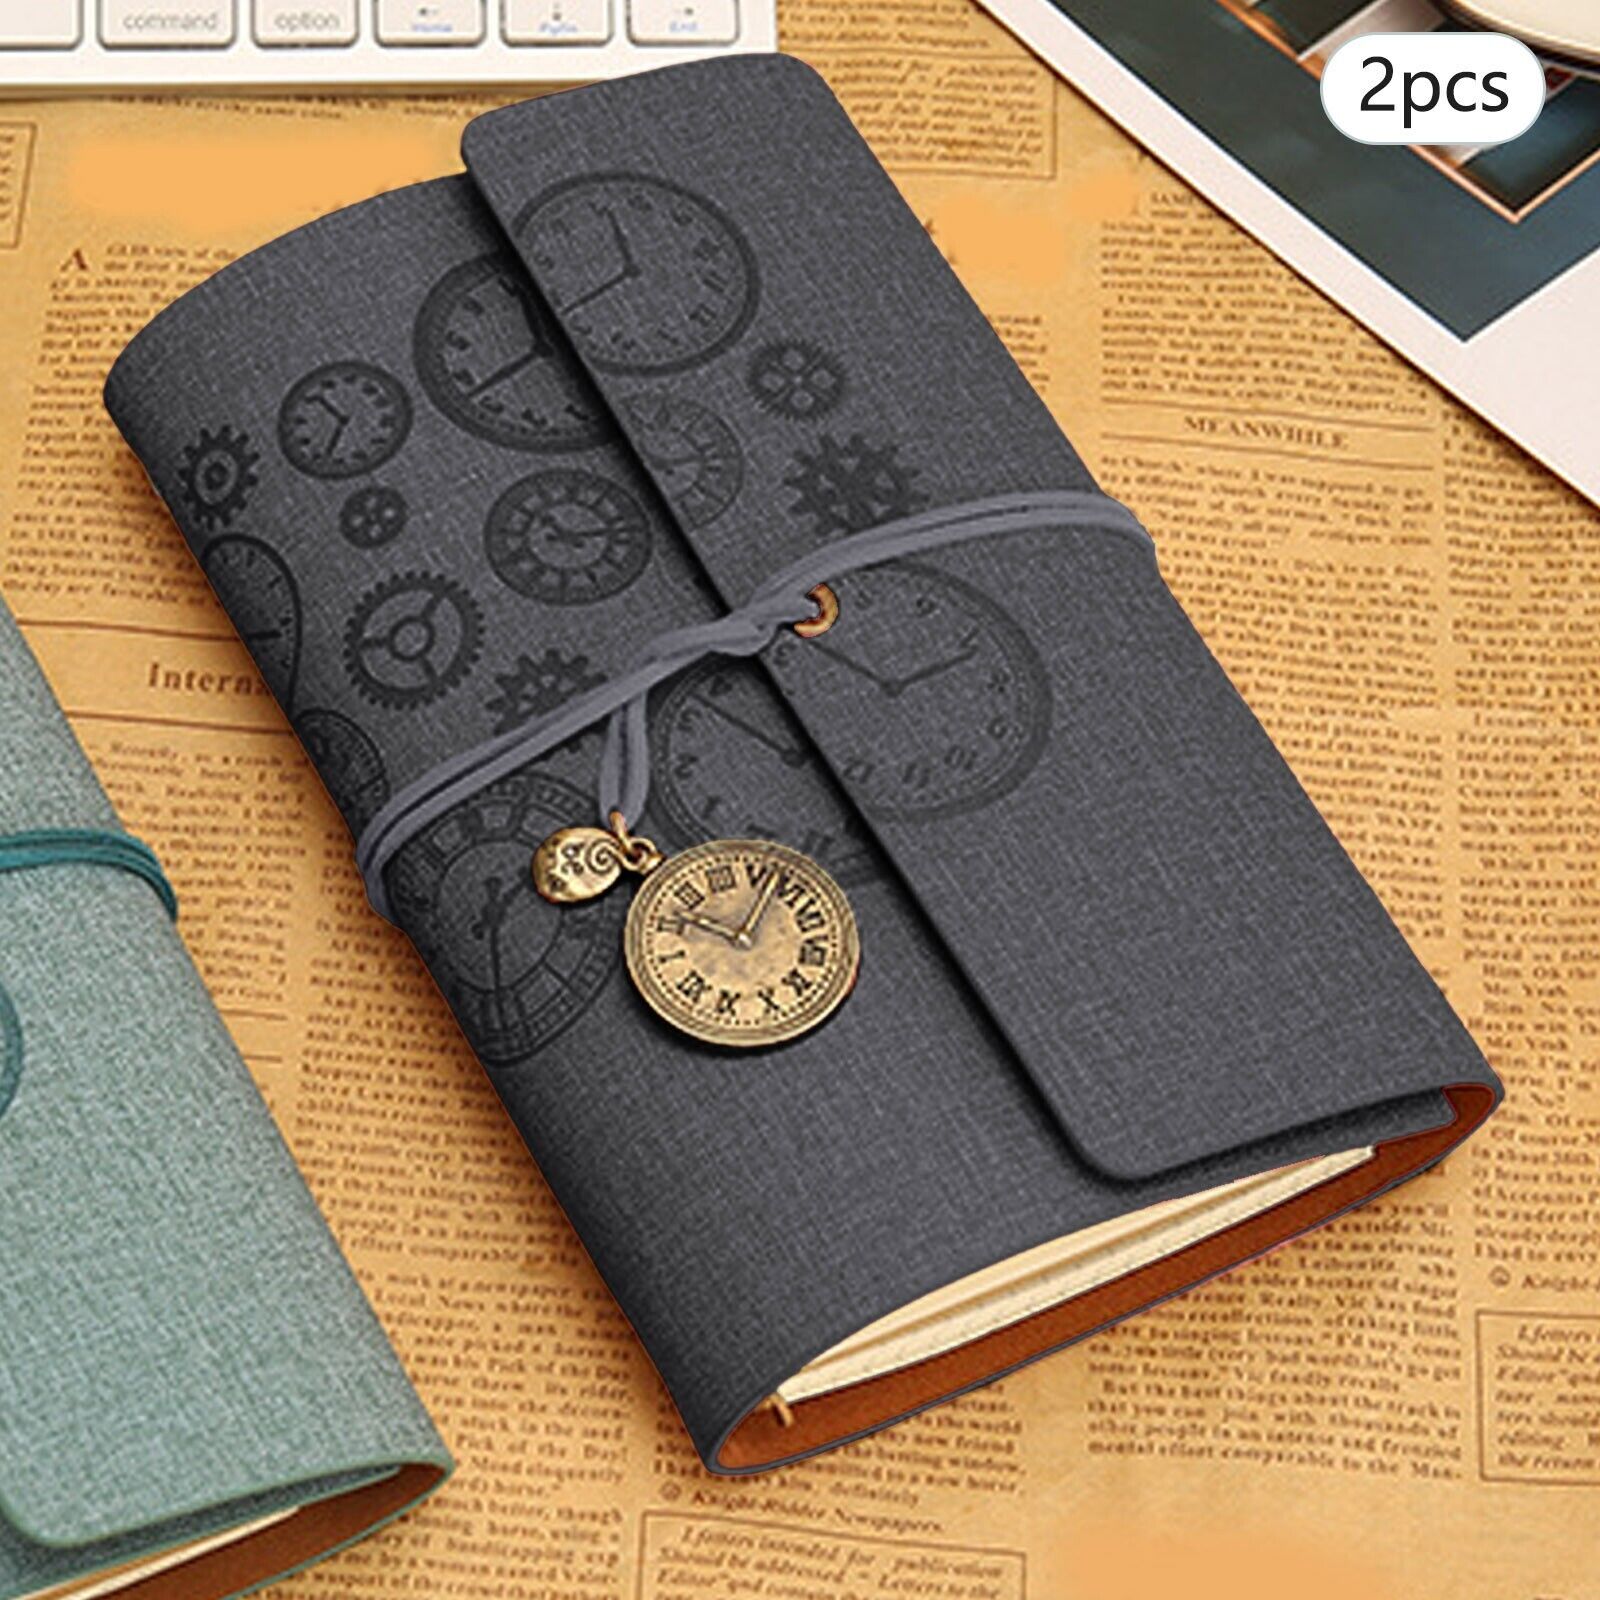 2PCS A6 Loose Leaf Vintage Style Binding Creative Ledger Diary Notebook